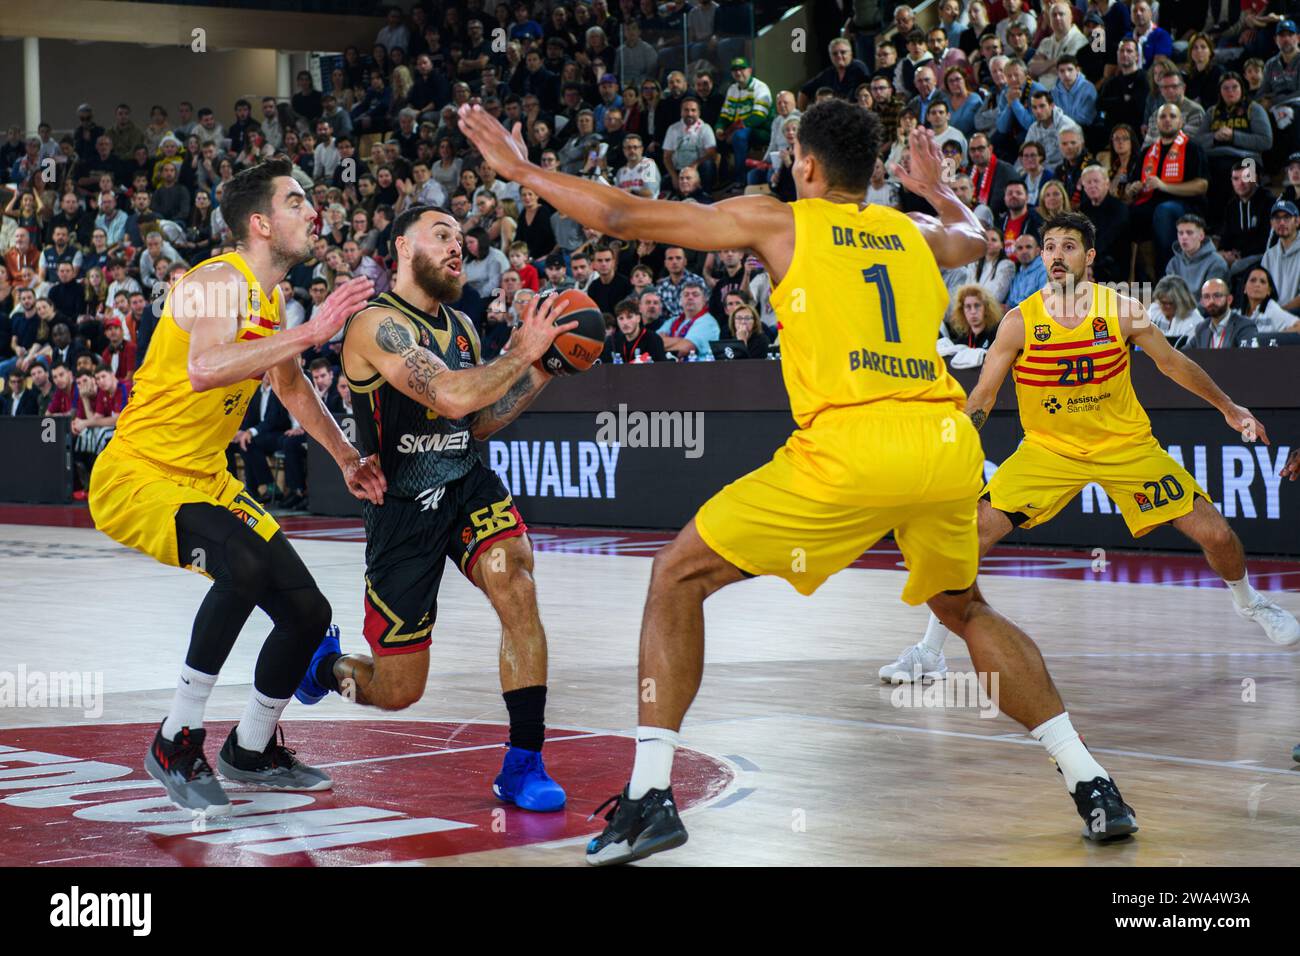 Monaco, Monaco. 29th Dec, 2023. Monaco player #55 Mike James and Barcelona players #13 Tomas Satoransky, #1 Oscar da Silva and #20 Nicolas Laprovitta are seen in action during the match for the 17th round of the Turkish Airlines Euroleague between AS Monaco and FC Barcelona at the Salle Gaston-Medecin in Monaco, on December 29, 2023. Photo by Laurent Coust/ABACAPRESS.COM Credit: Abaca Press/Alamy Live News Stock Photo